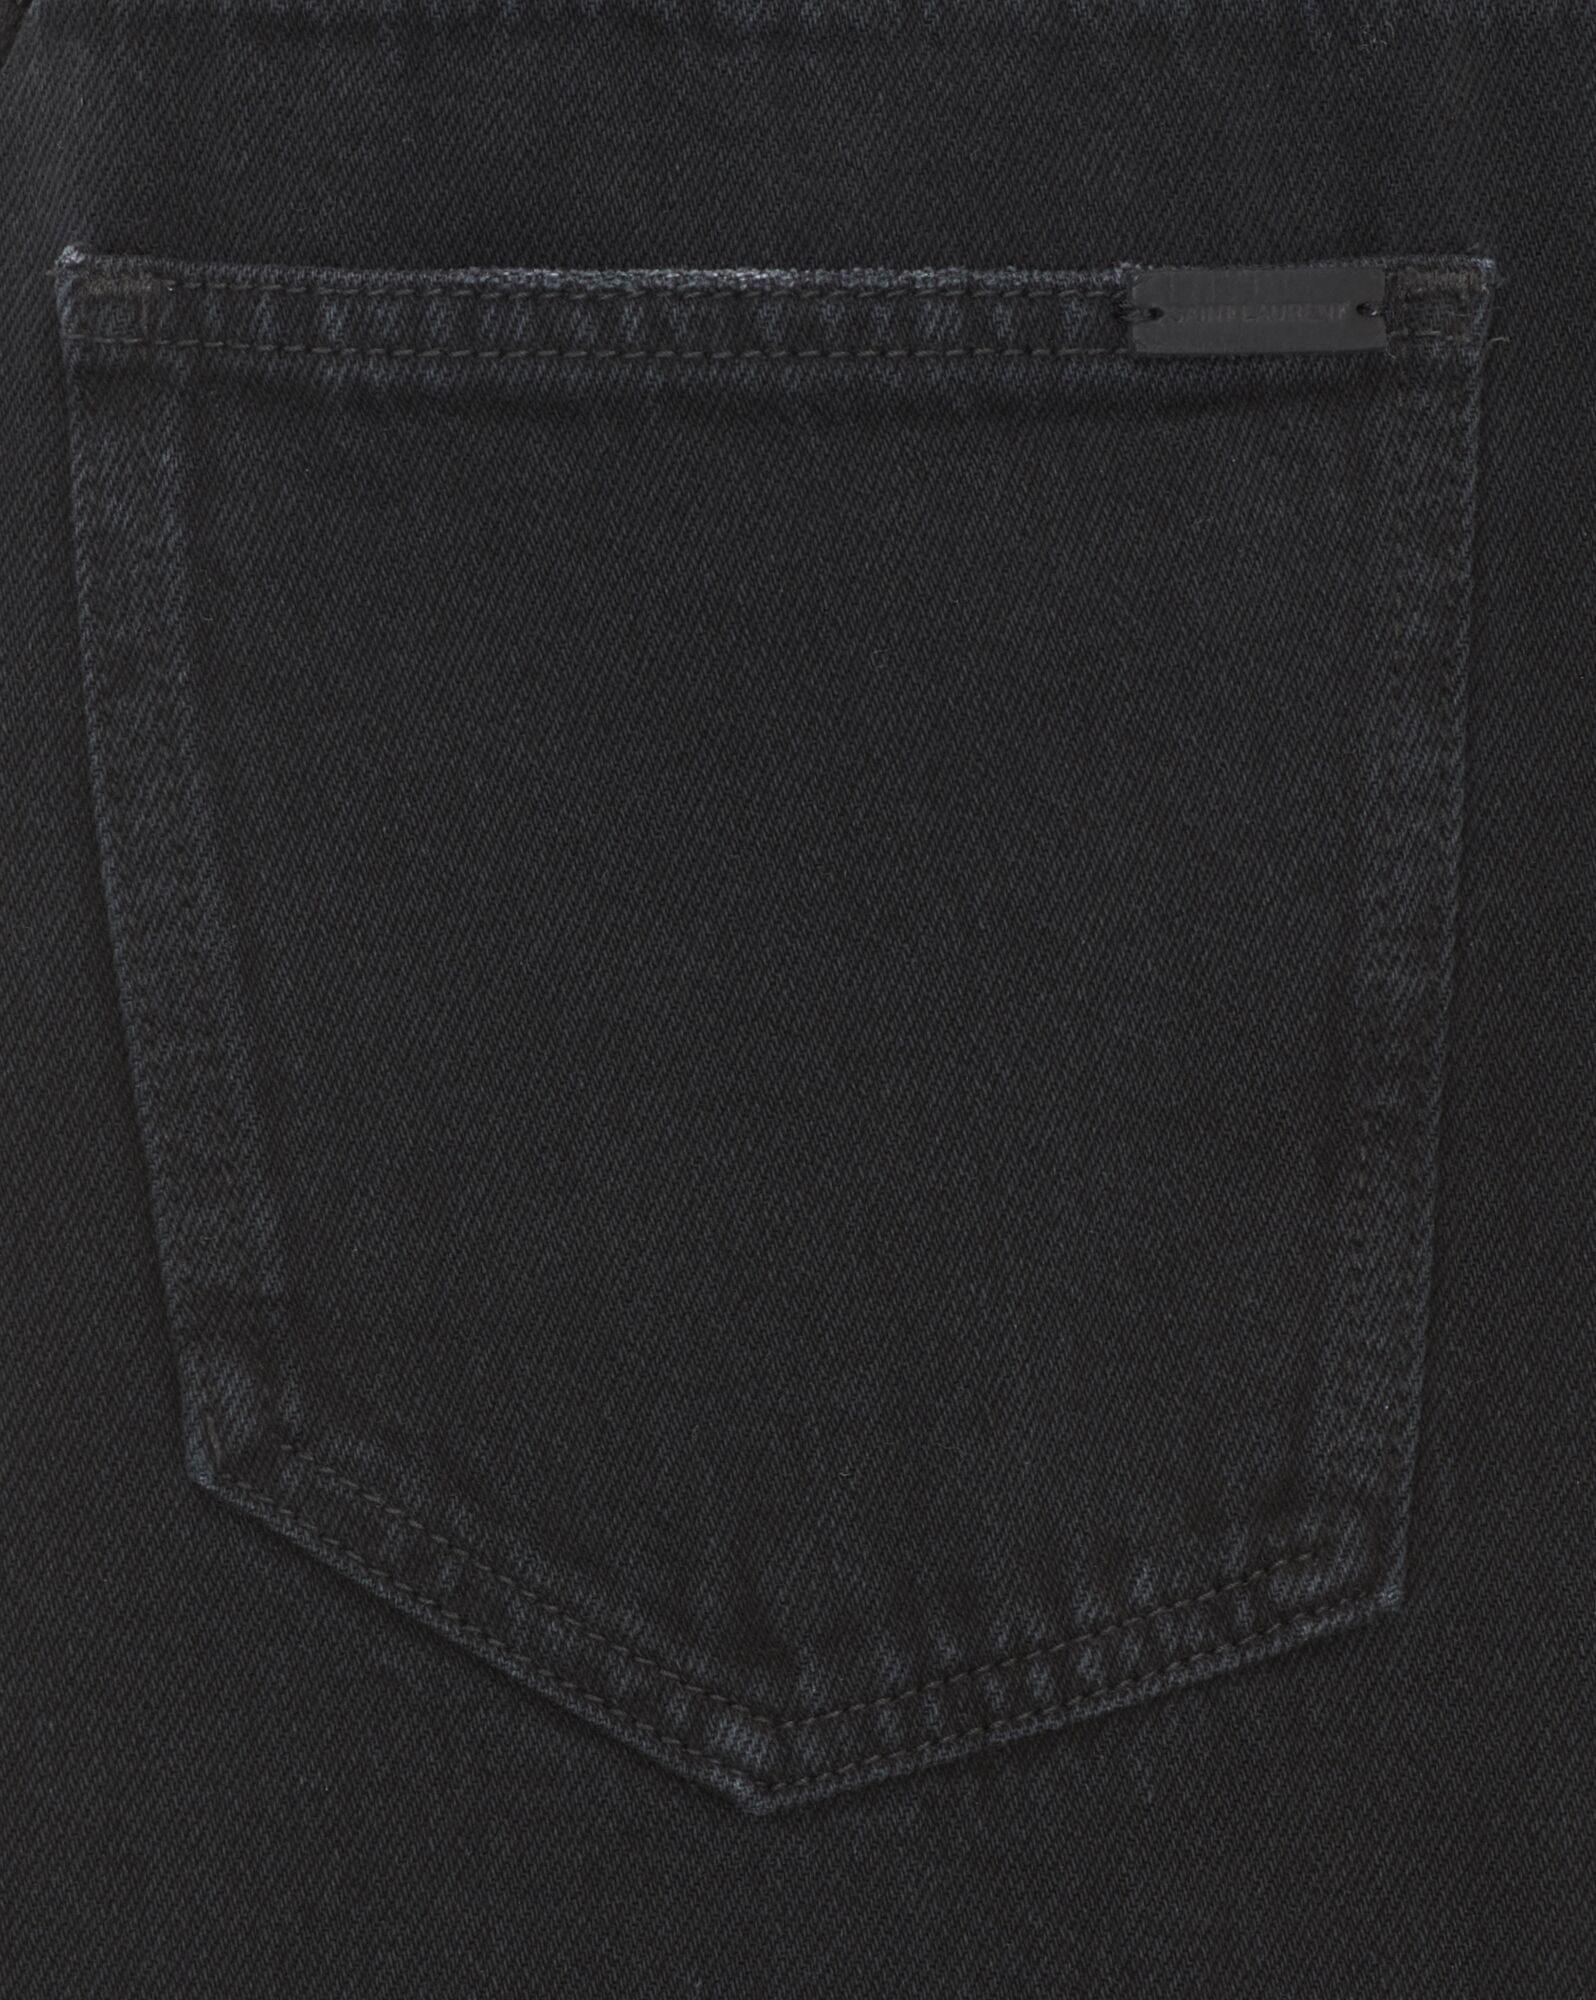 long extreme baggy jeans in carbon black denim - 5